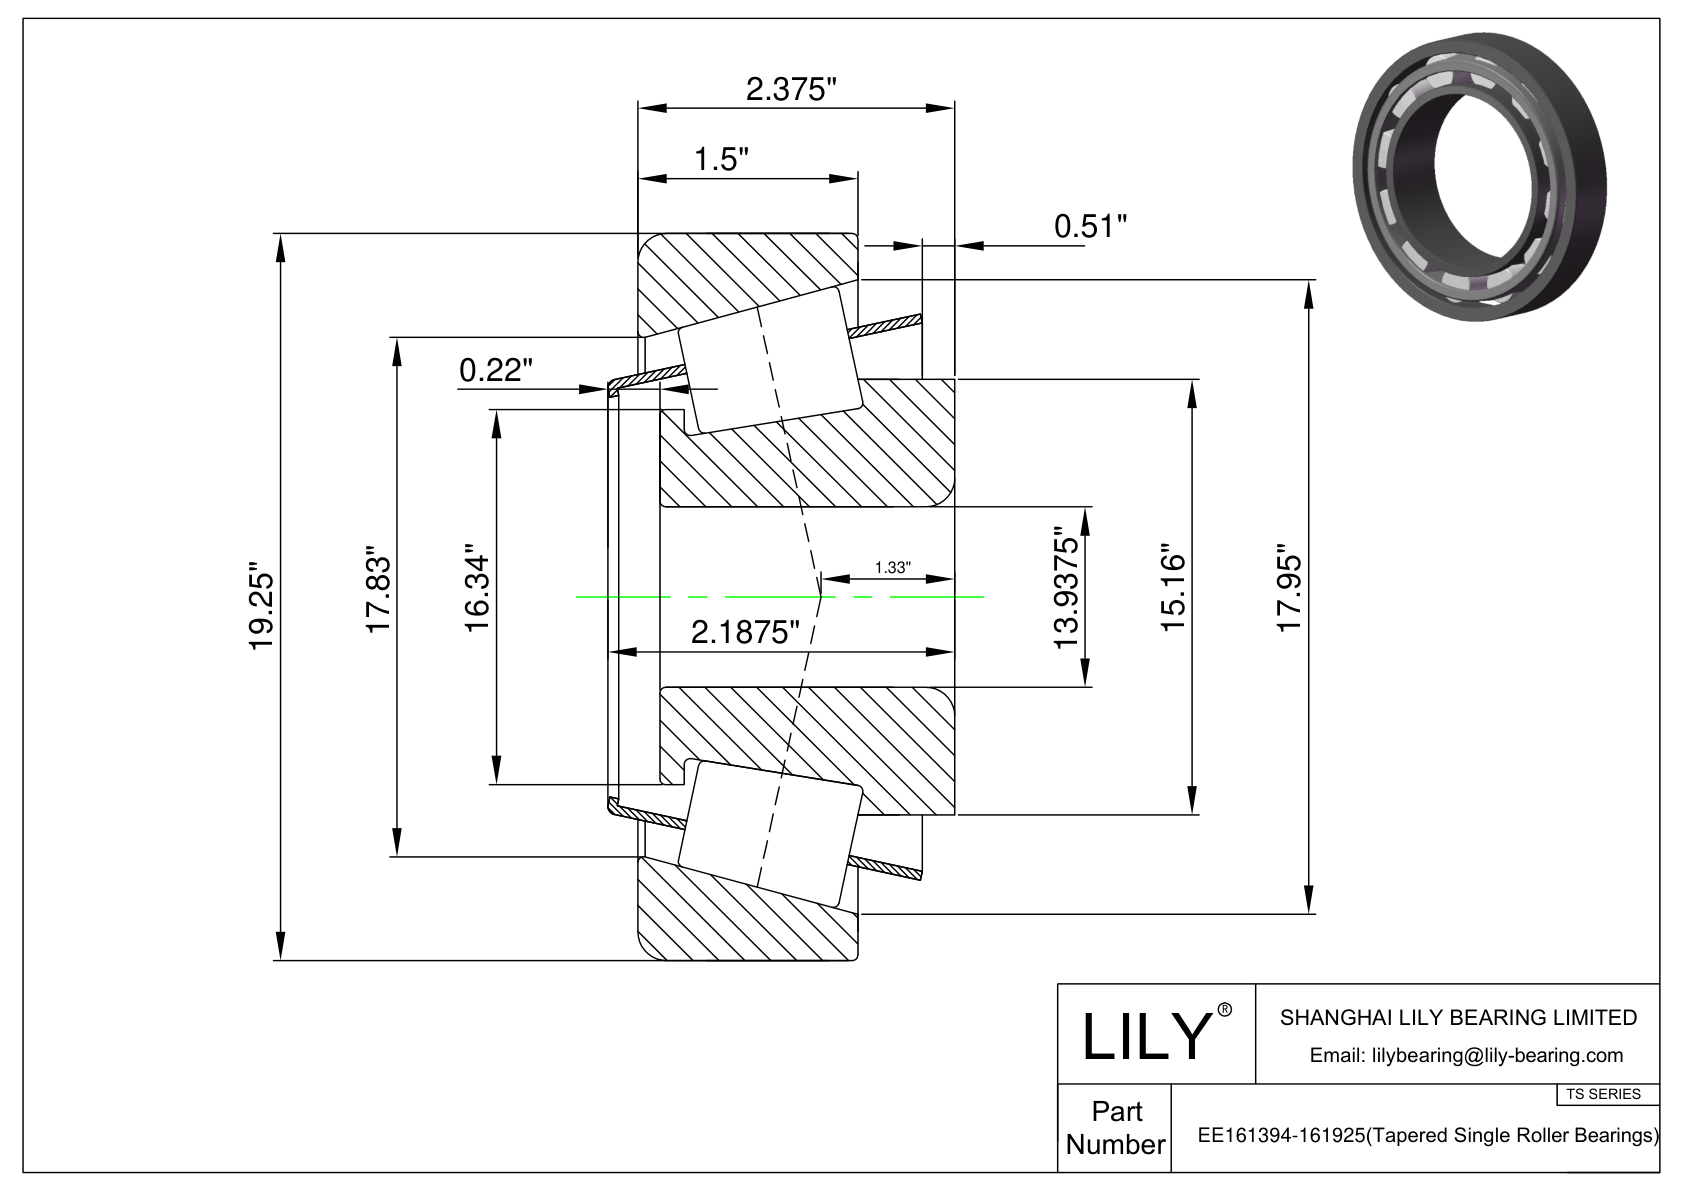 EE161394-161925 TS (Tapered Single Roller Bearings) (Imperial) cad drawing